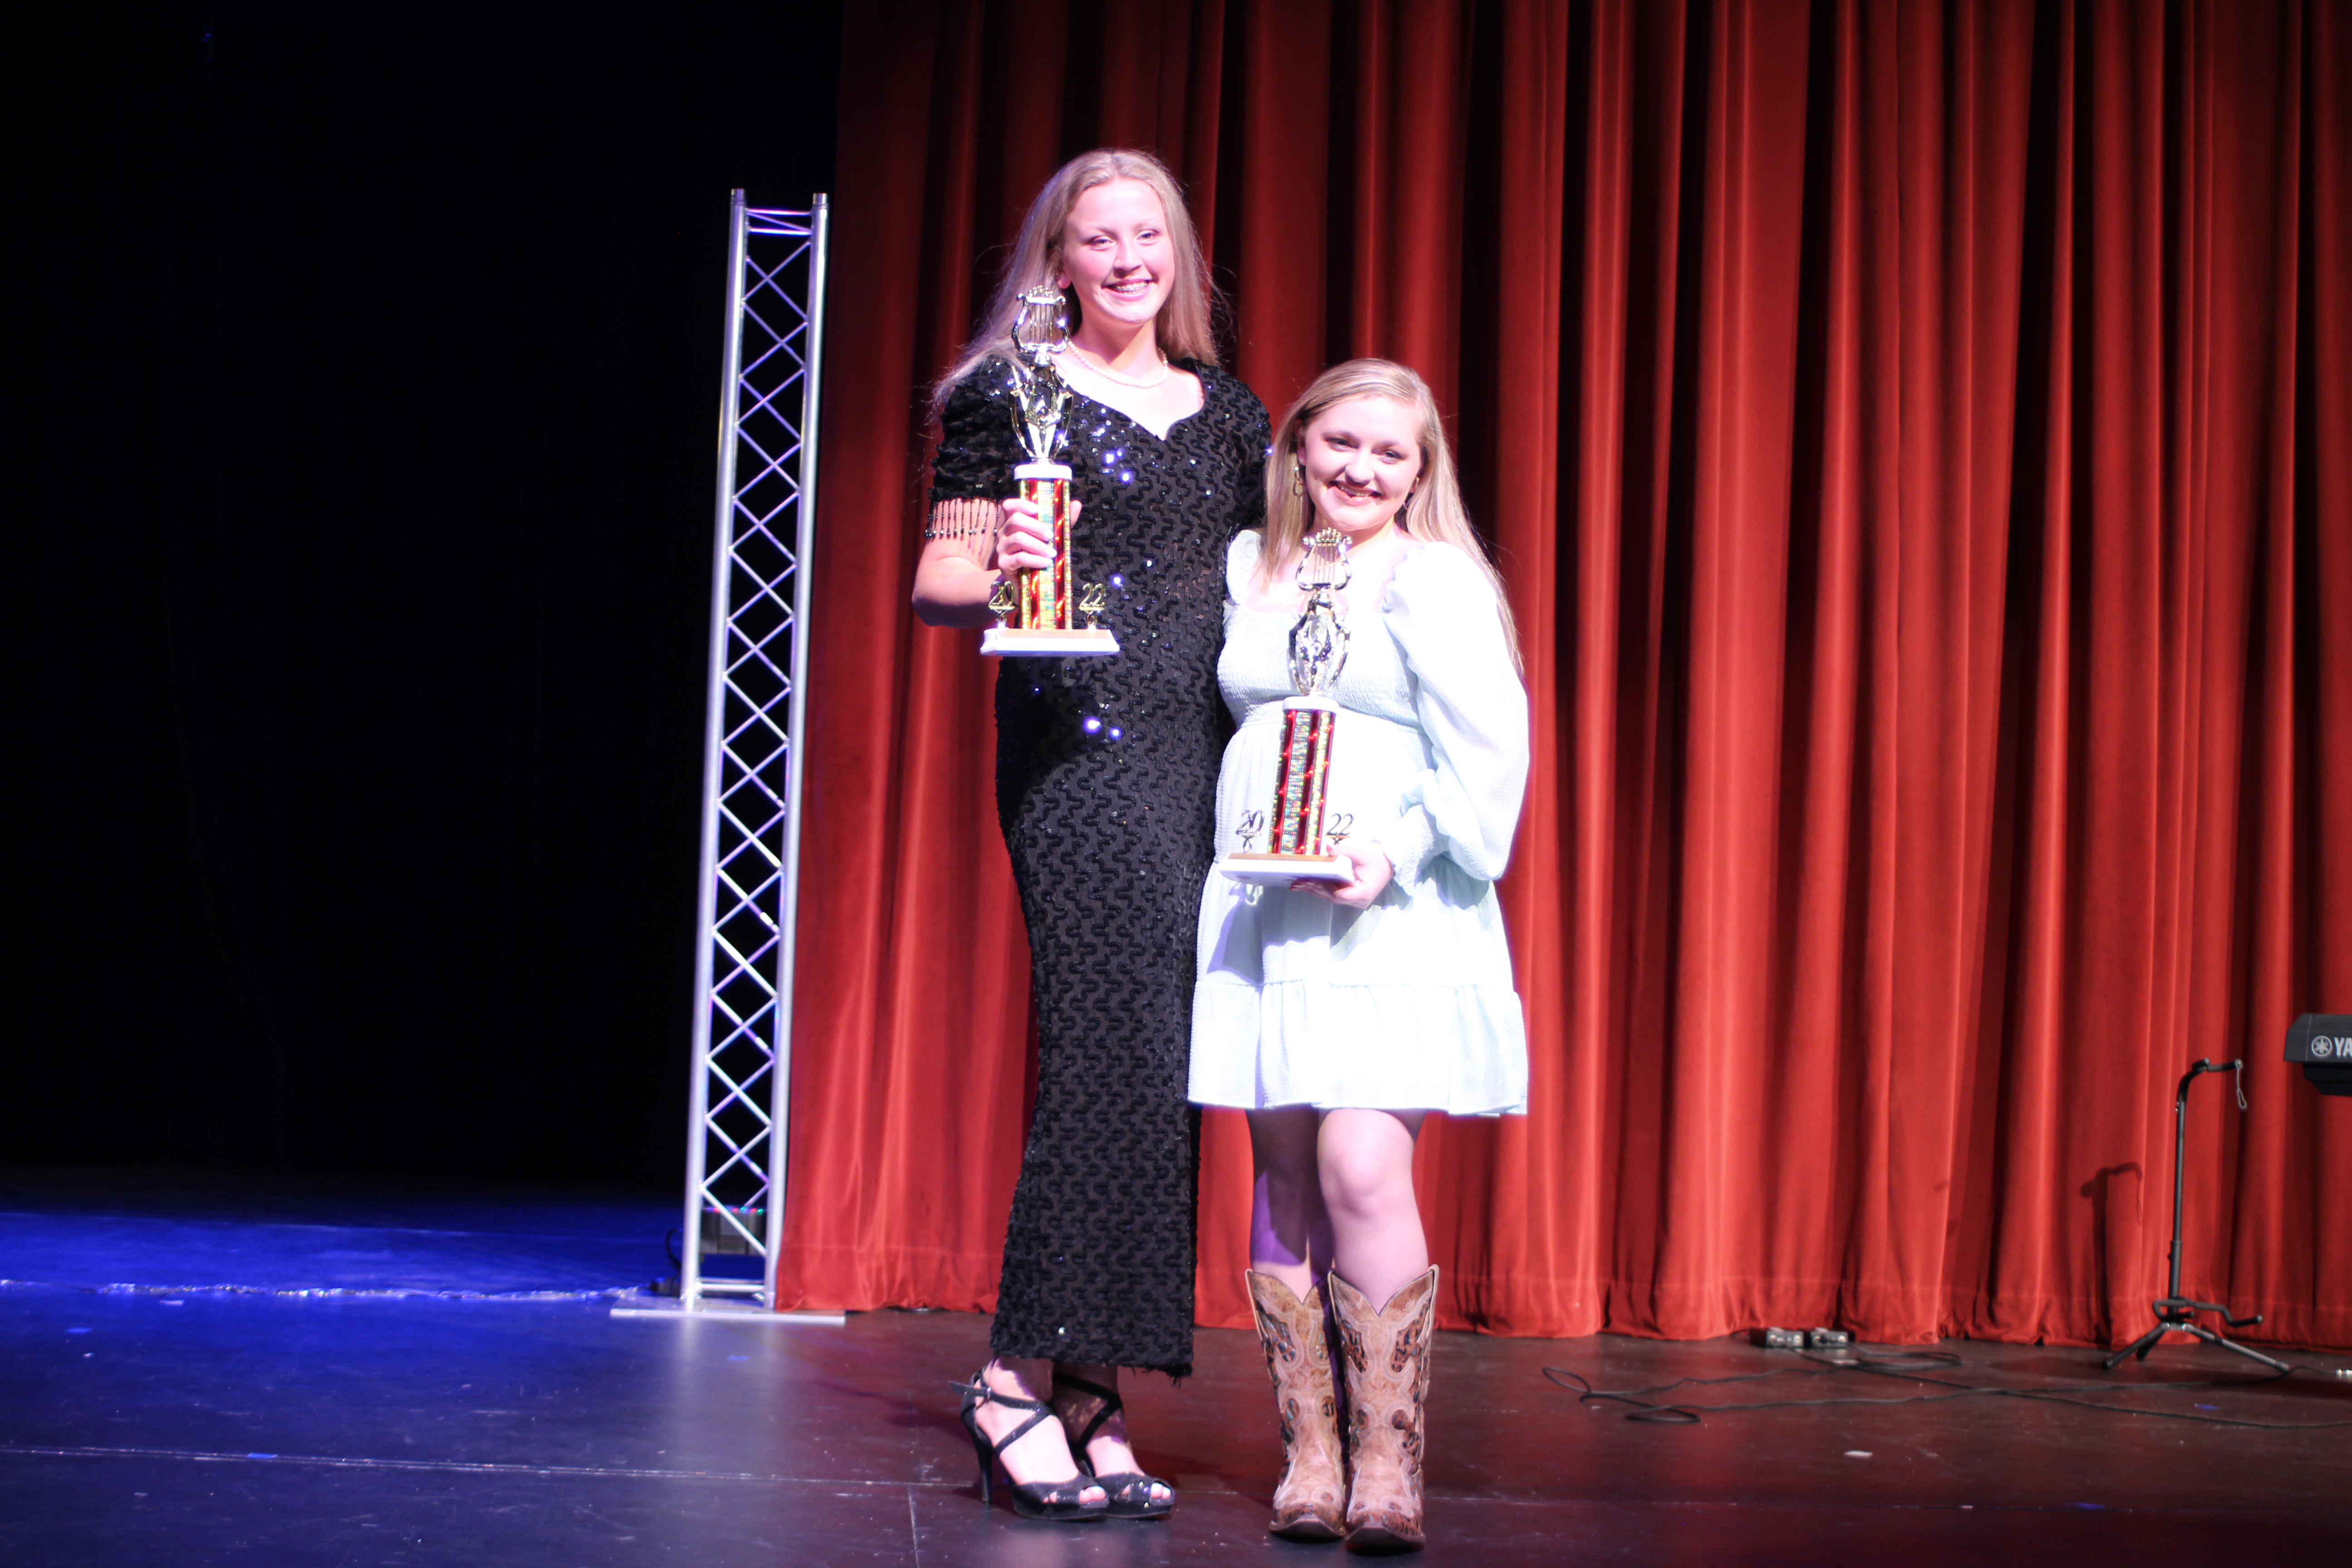 Megan Broome/The Clayton Tribune. Hailey Smith, left, took home the award for Judges’ Choice and Ashlynn Blackwell took home the award for Fan Favorite at the Rabun Idol competition held at the Rabun County High School Fine Arts Building March 19. Smith sang “Burning House” by Cam and “Con el Viento” by Jesse Reyes. Blackwell sang “Dirt Road Prayer” by Lauren Alaina and “Shut Up and Fish” by Maddie and Tae. Judges were Allen Blair, Alicia Kilby and Daven Vandenberg. 